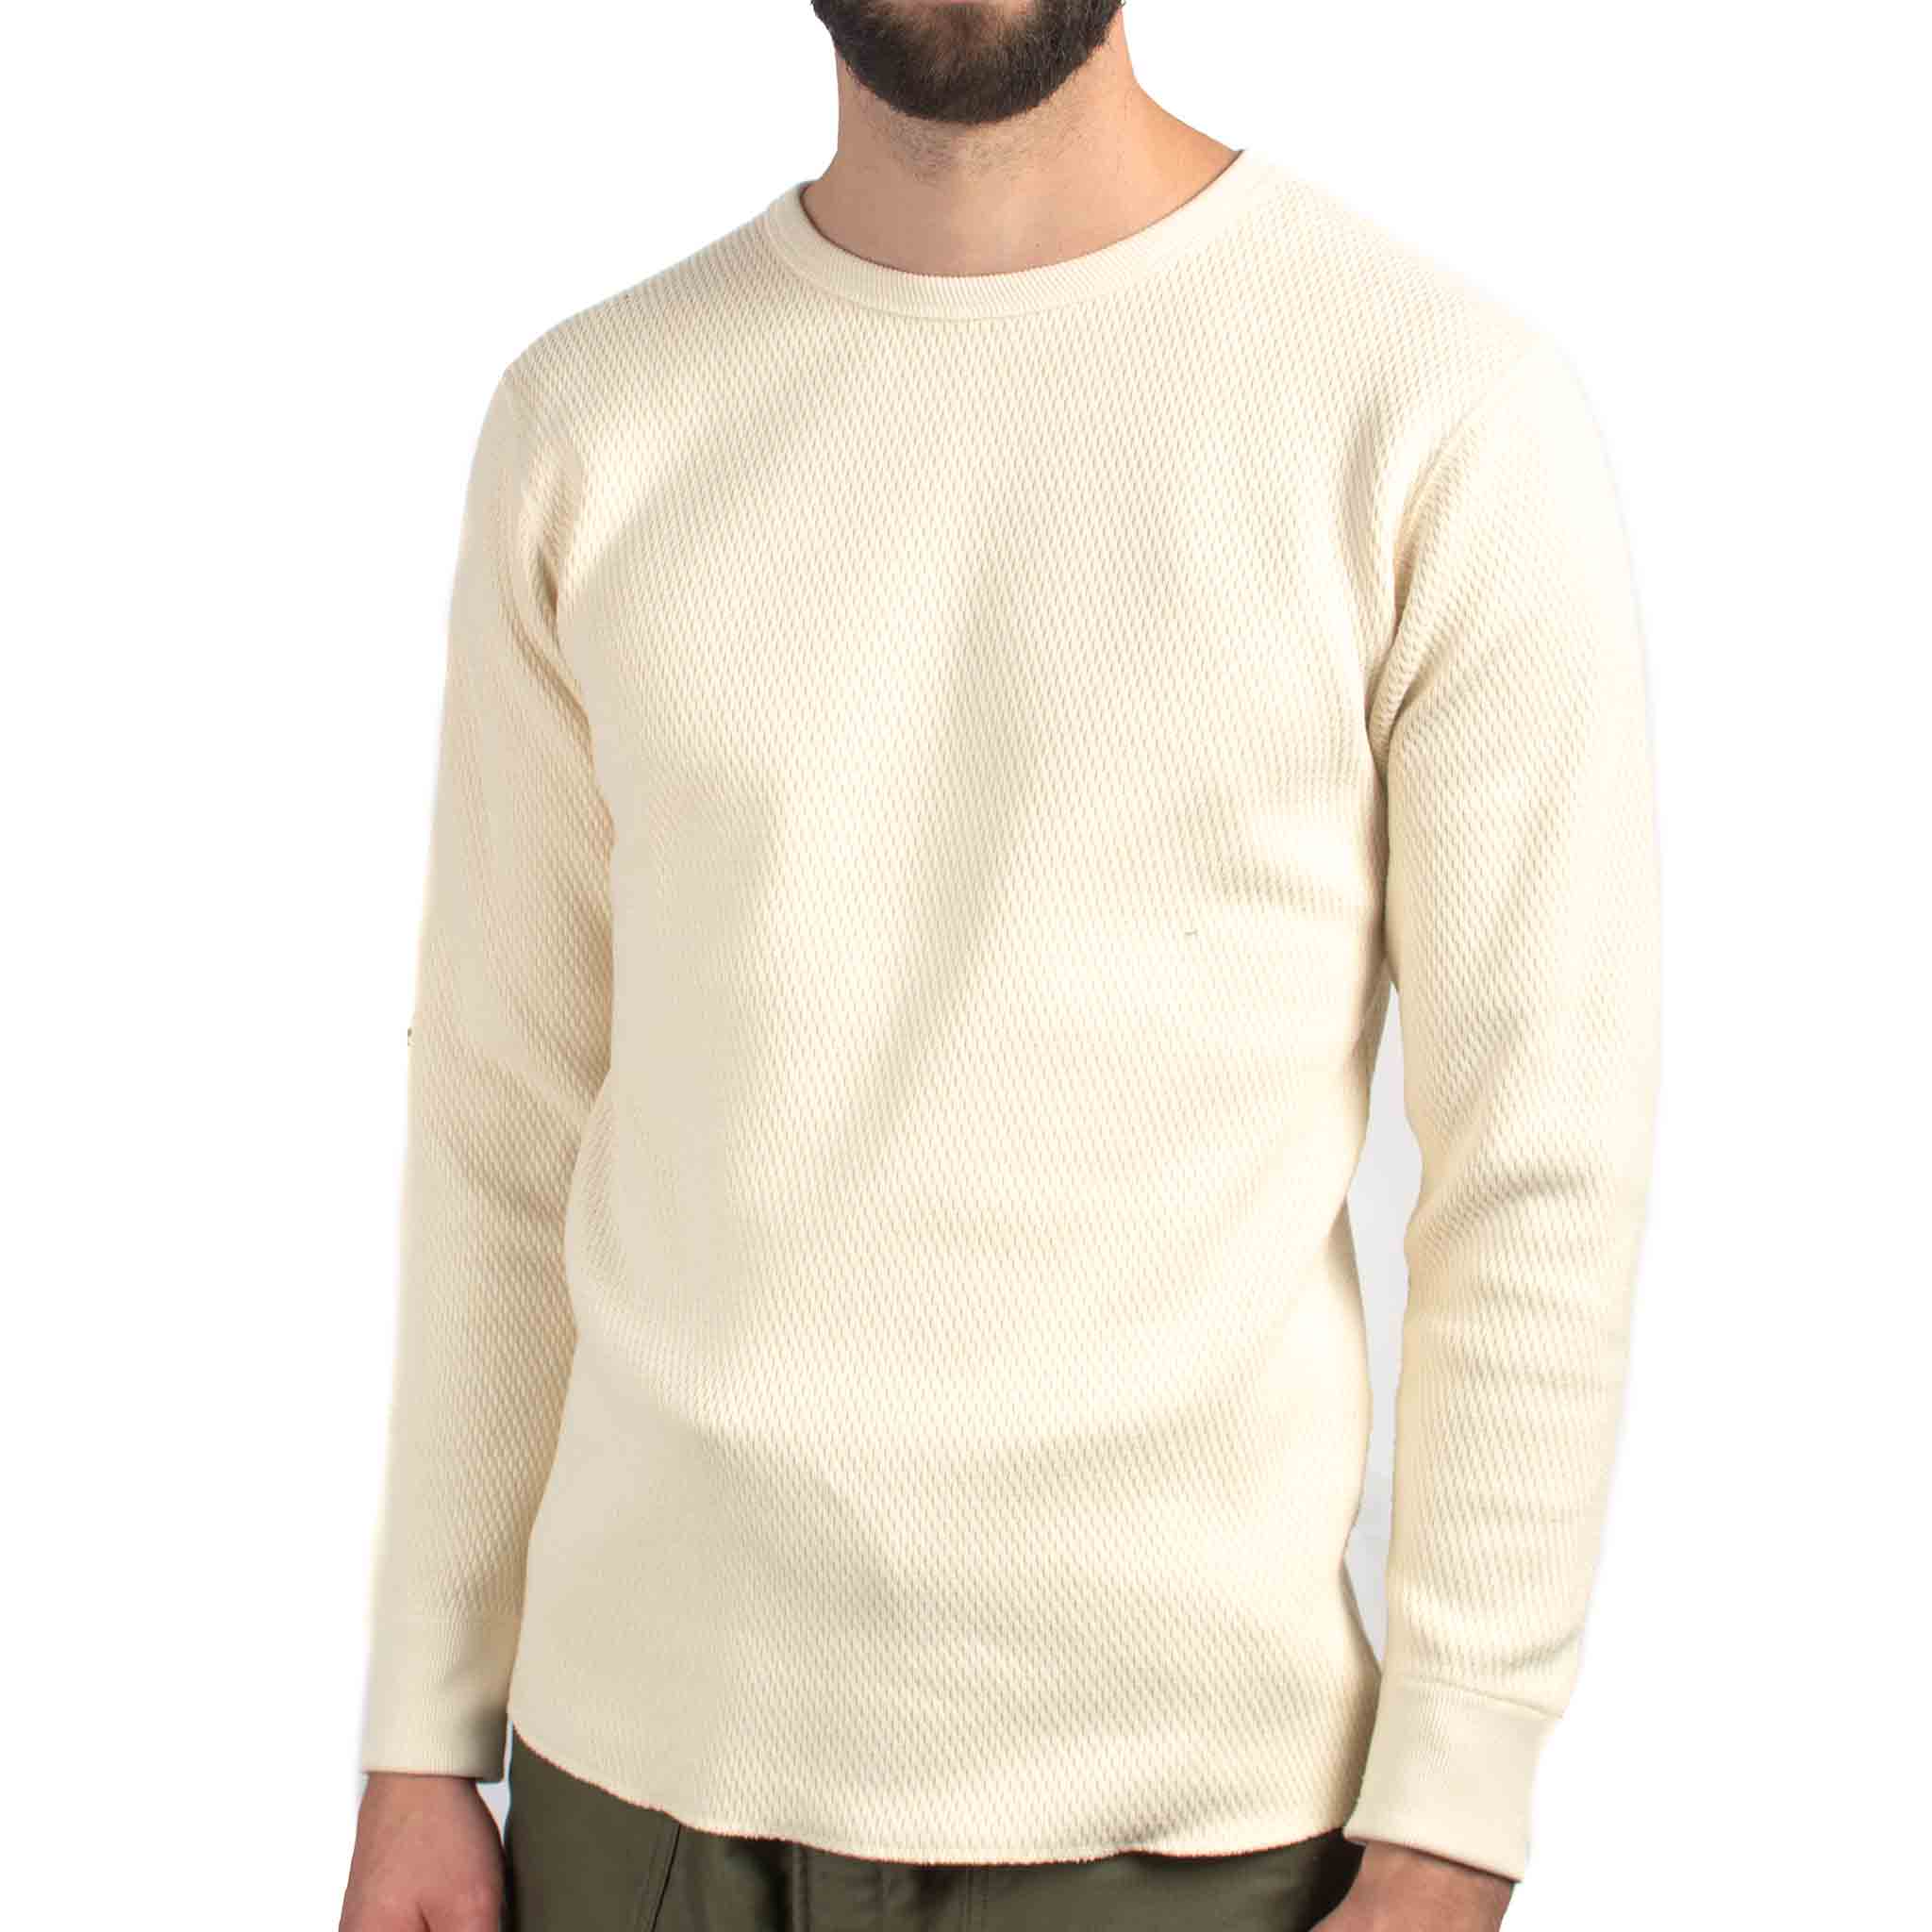 The Real McCoy's MC12110 Military Thermal Shirt Ivory Close